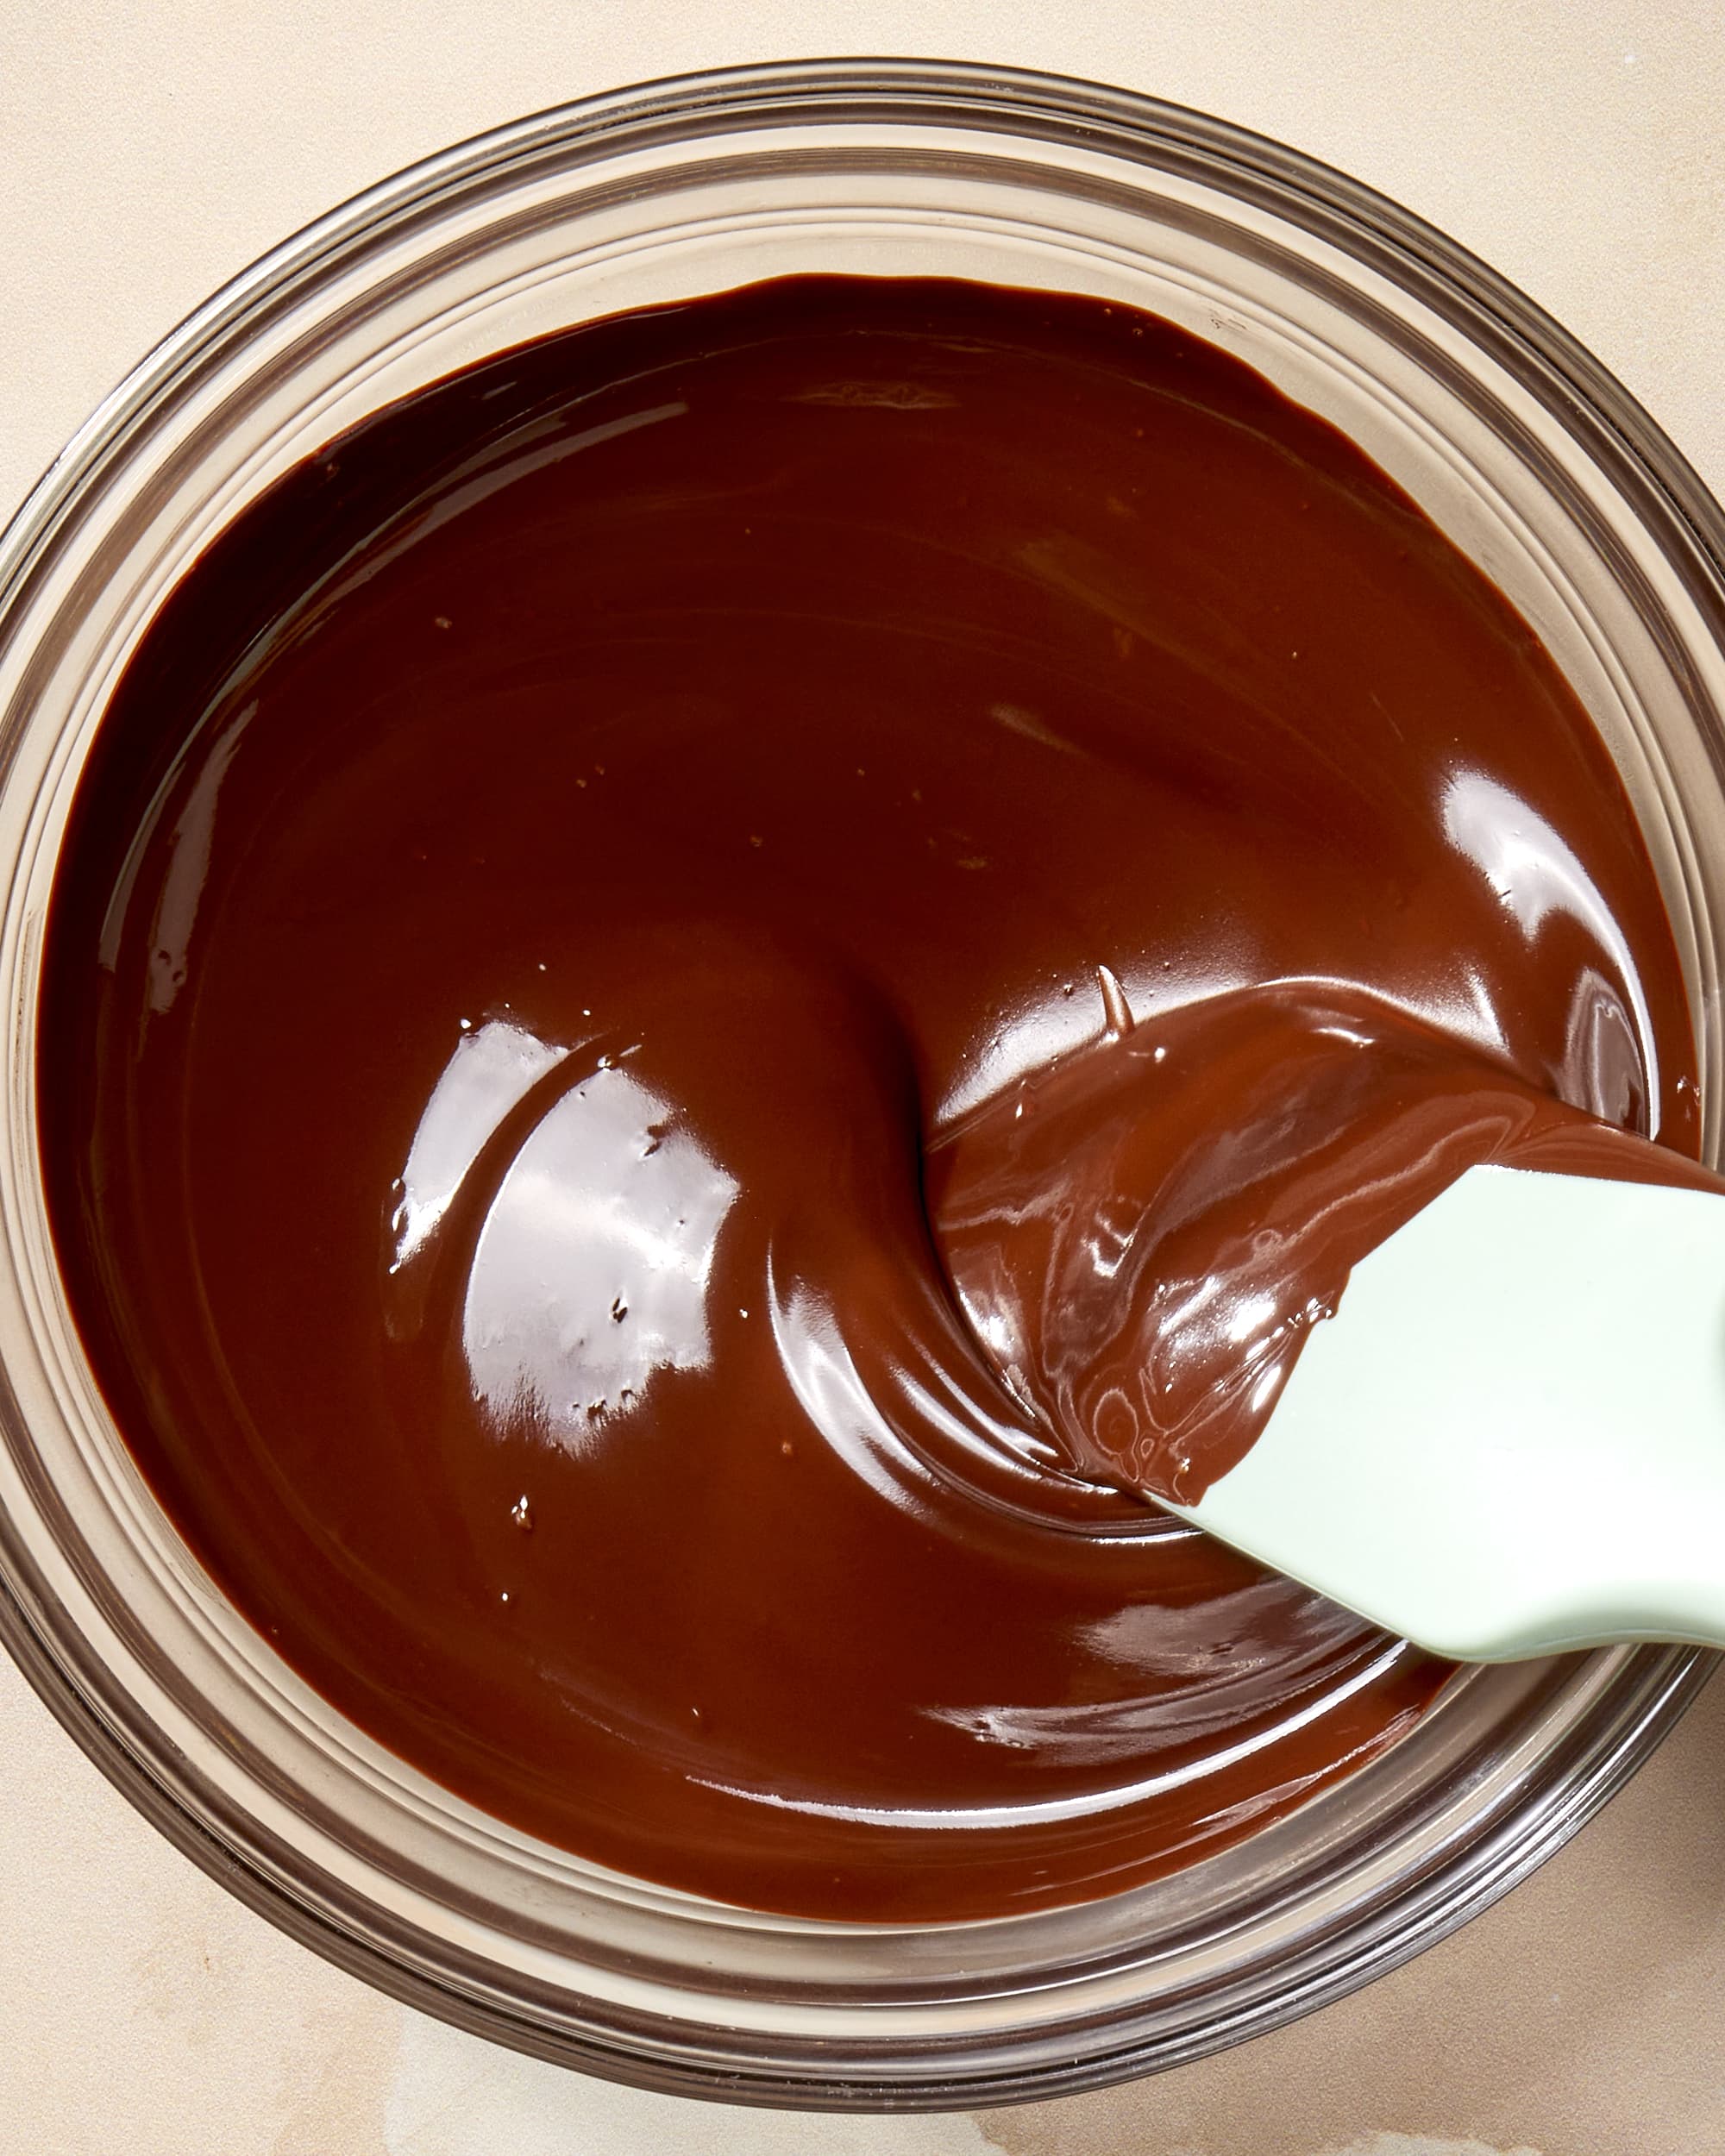 Watch How to Melt Chocolate, Epicurious Essentials: Cooking How-Tos